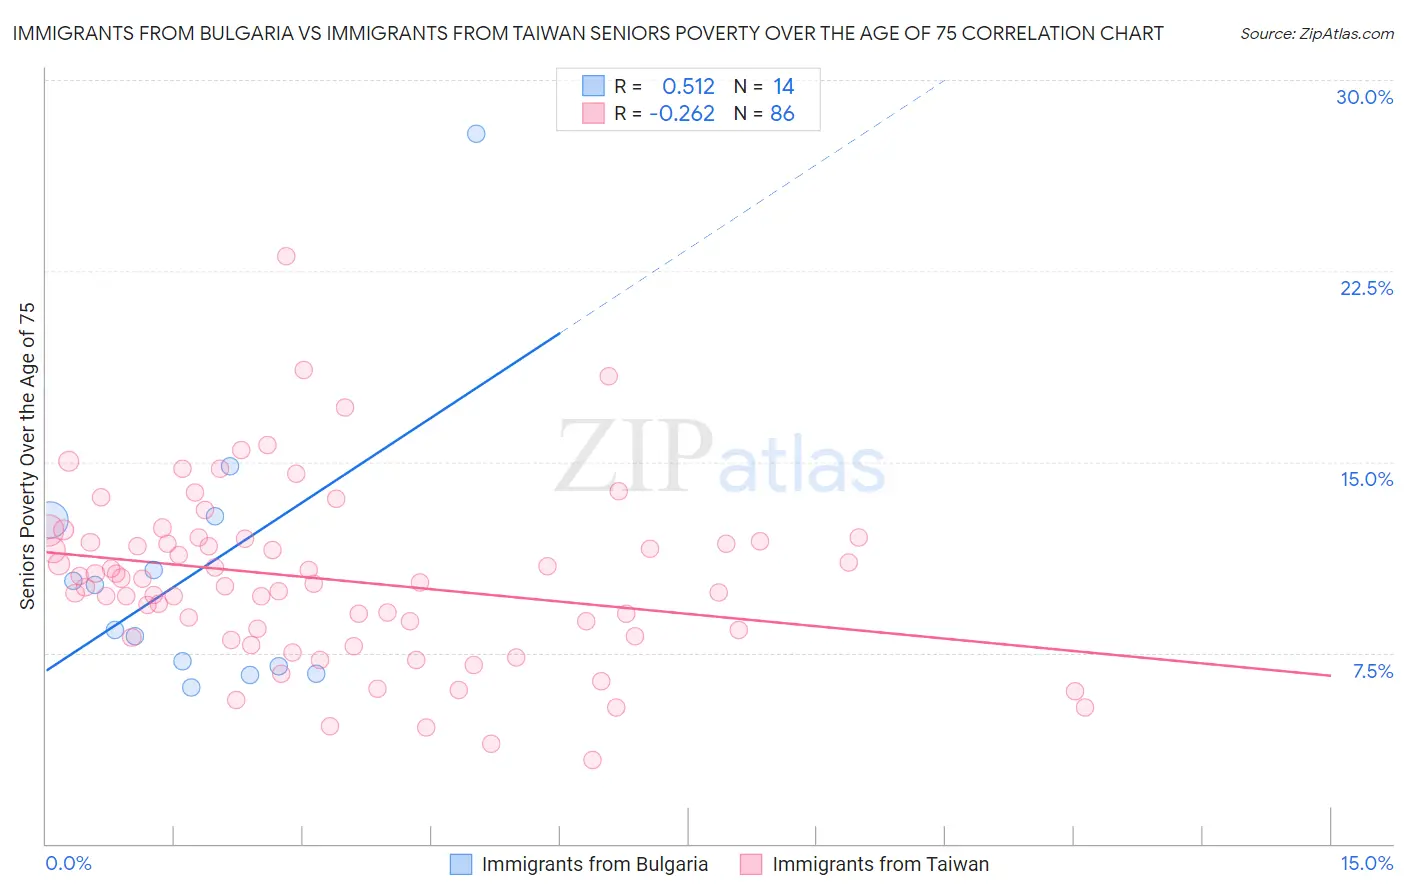 Immigrants from Bulgaria vs Immigrants from Taiwan Seniors Poverty Over the Age of 75